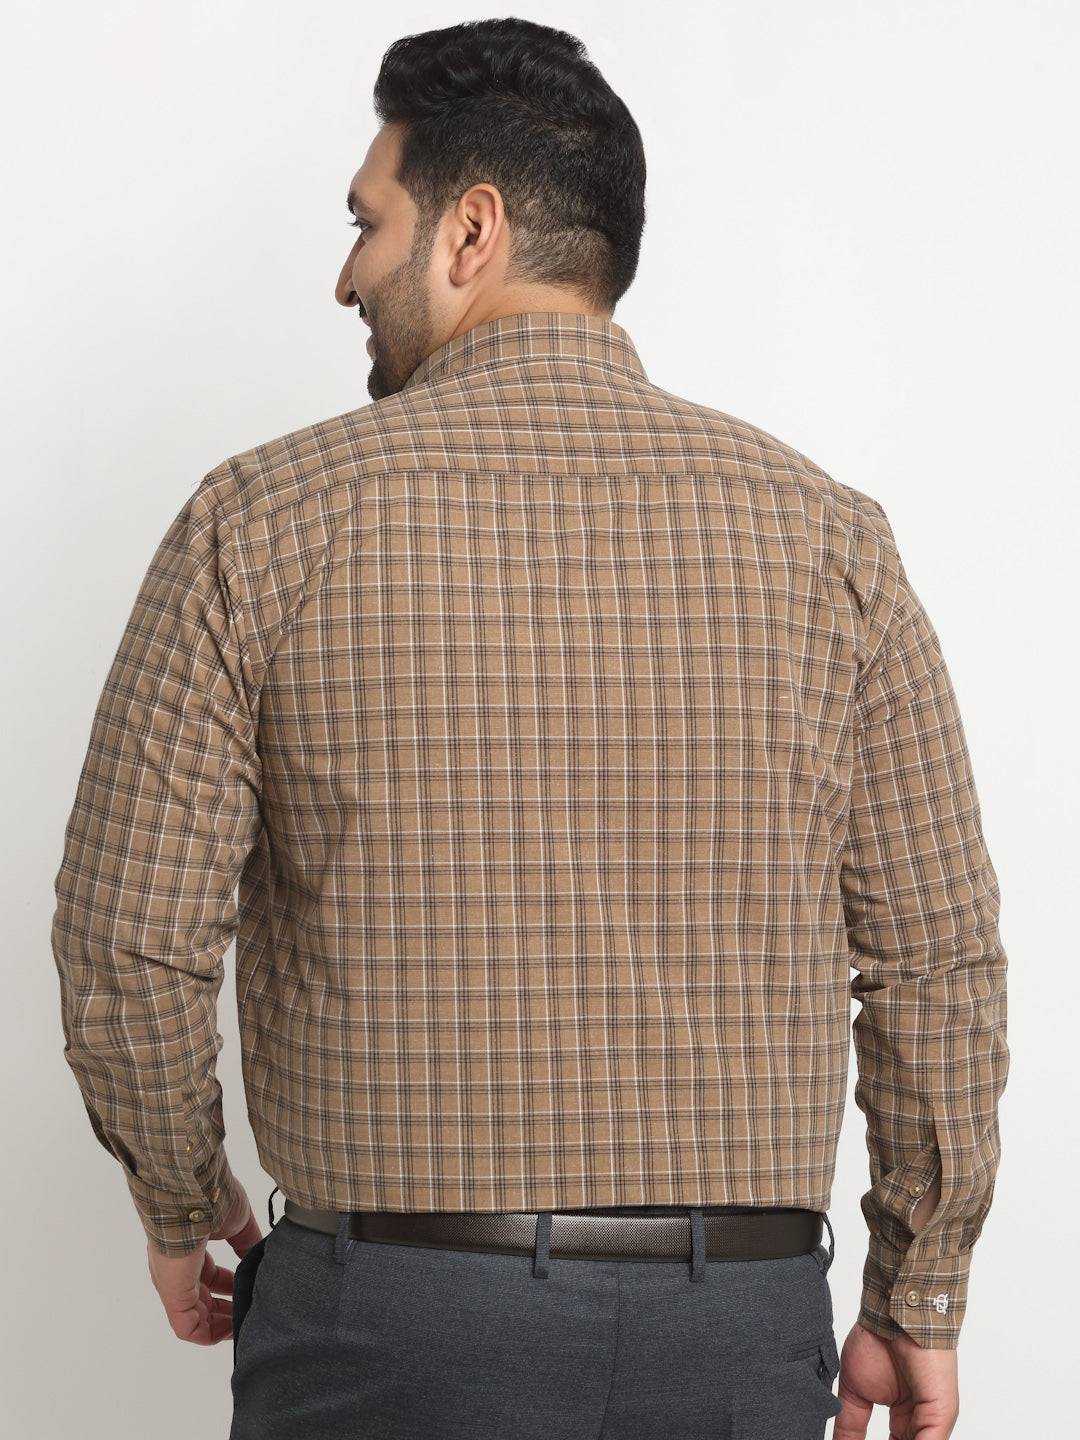 plusS Plus Size Brown Grid Tattersall Checked Opaque Formal Shirt